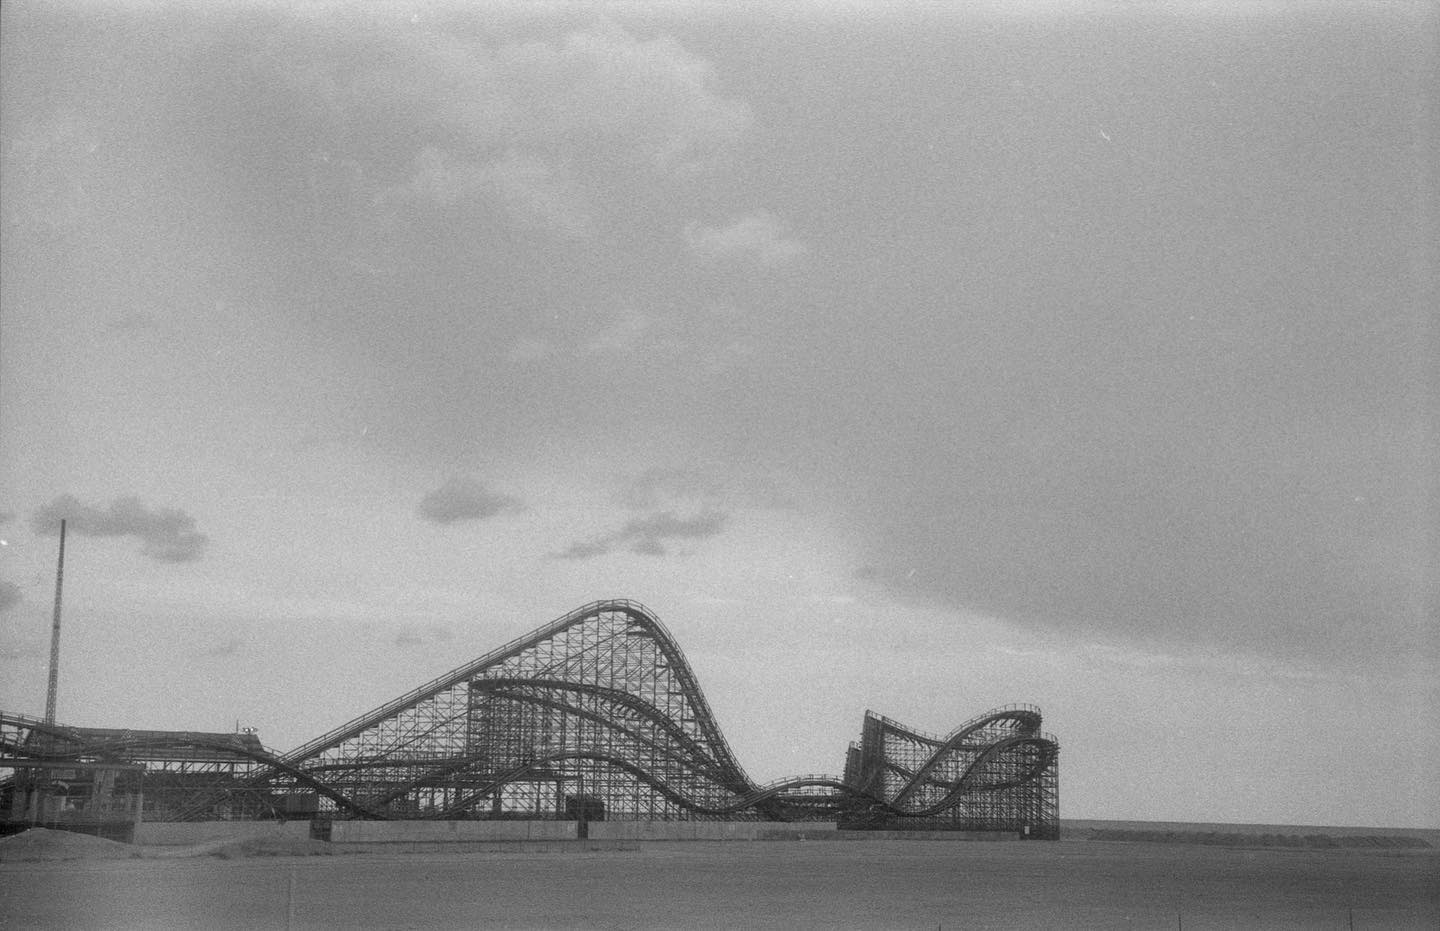 Roller Coaster

Most of the rides on the Wildwood boardwalk are on piers like this. #film #filmphotography #filmphoto #staybrokeshootfilm #contaxiii #polypanf50 #rodinal